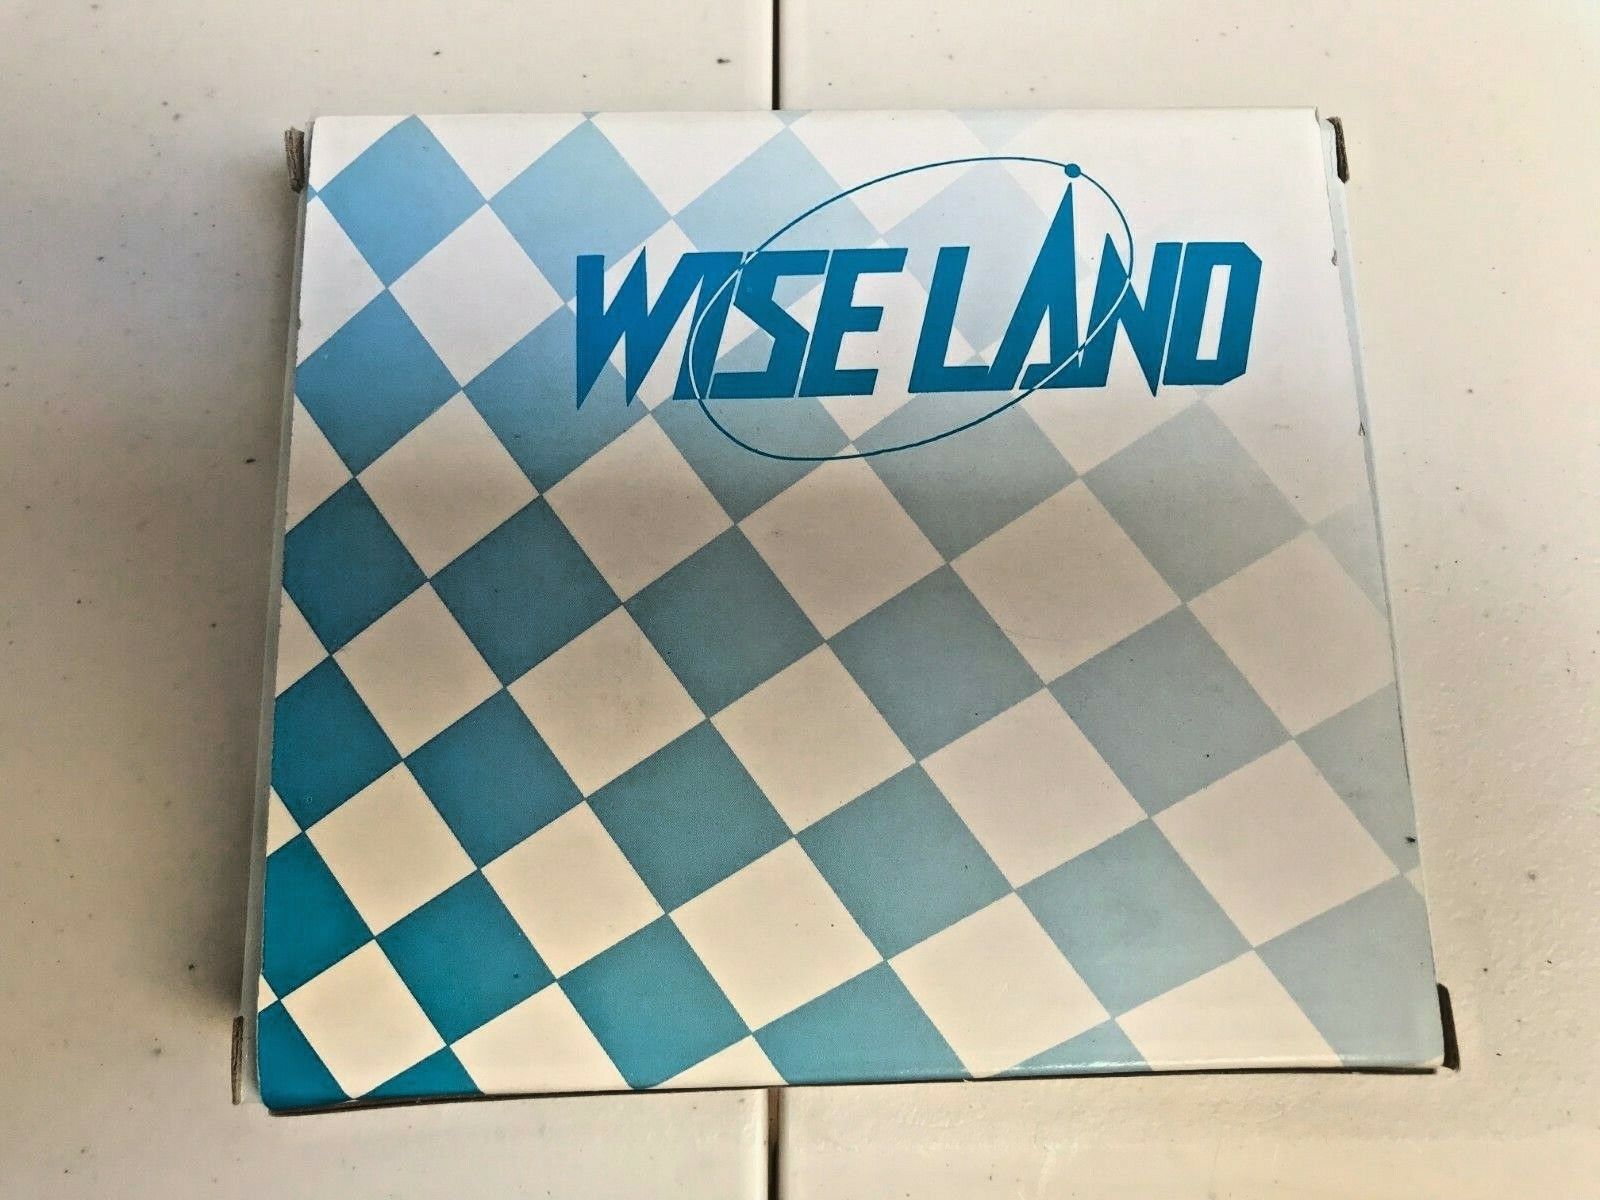 NEW VINTAGE WISELAND 8 BIT ISA I/O CARD WITH 2 SERIAL PARALLEL GAME RM00-MSBX13